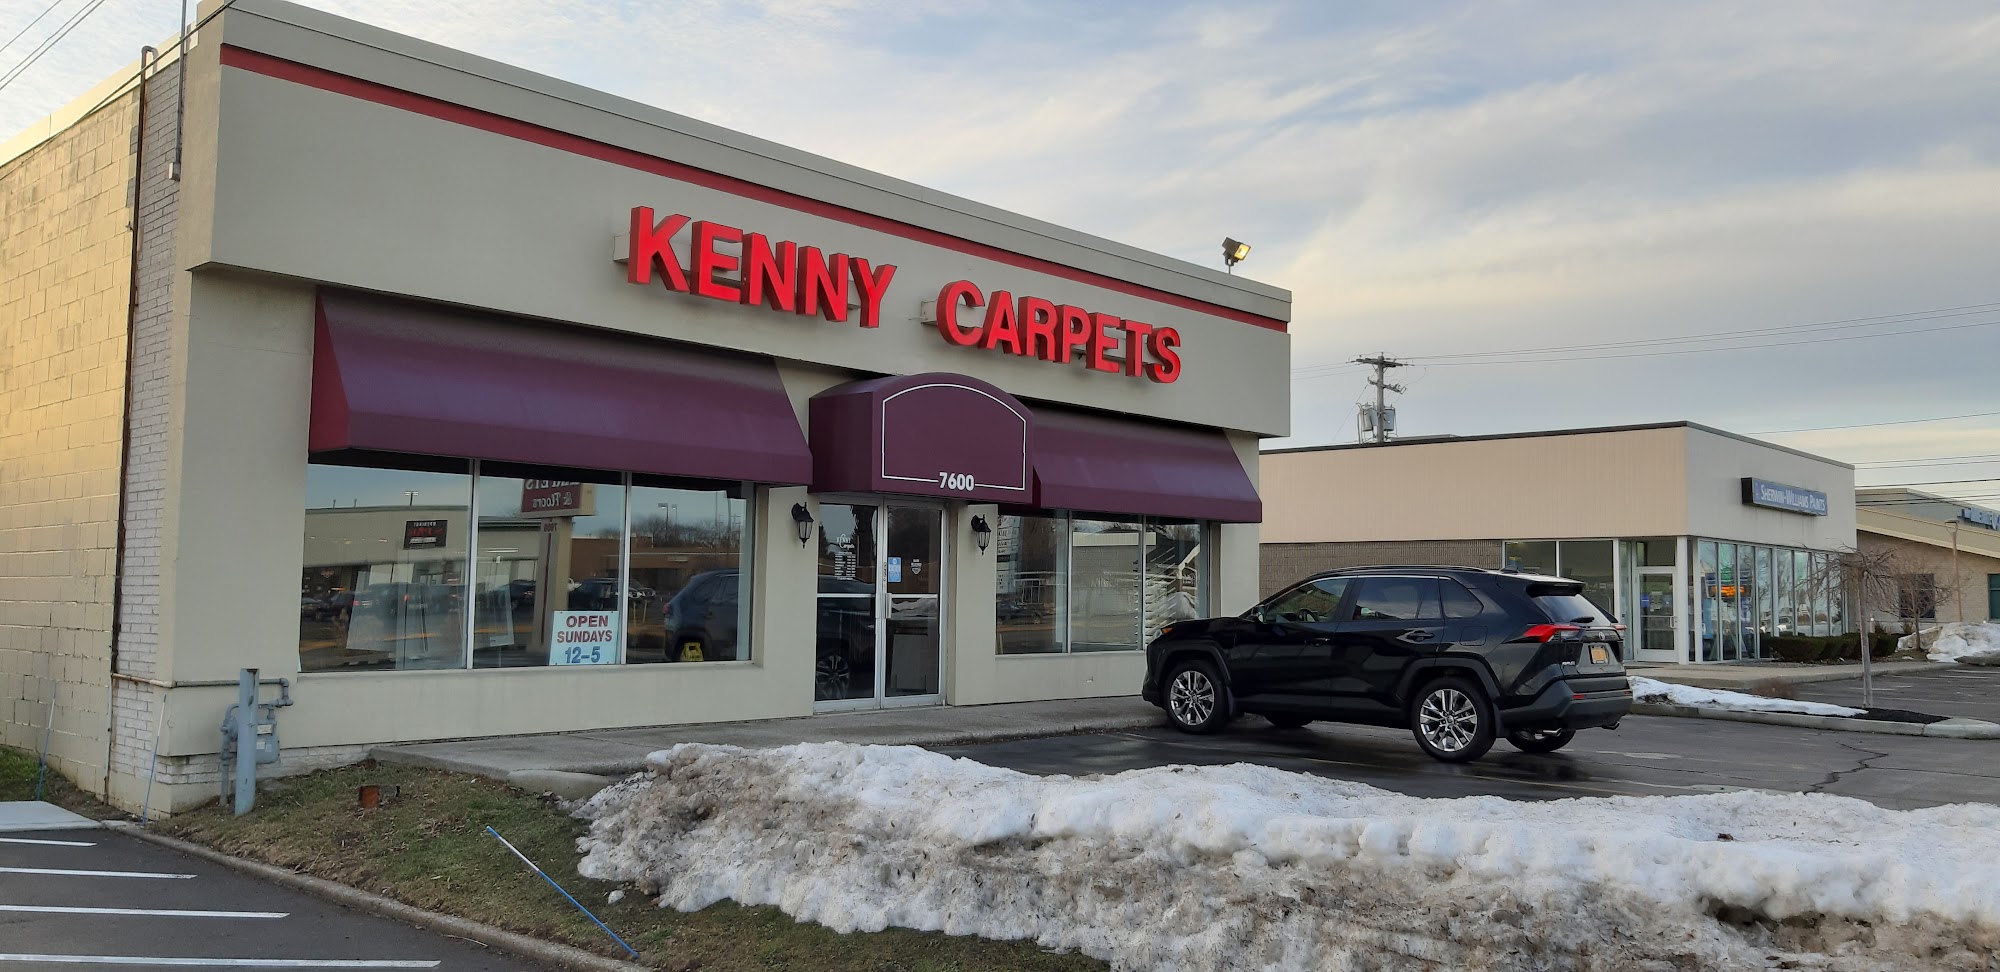 Kenny Carpets and Floors